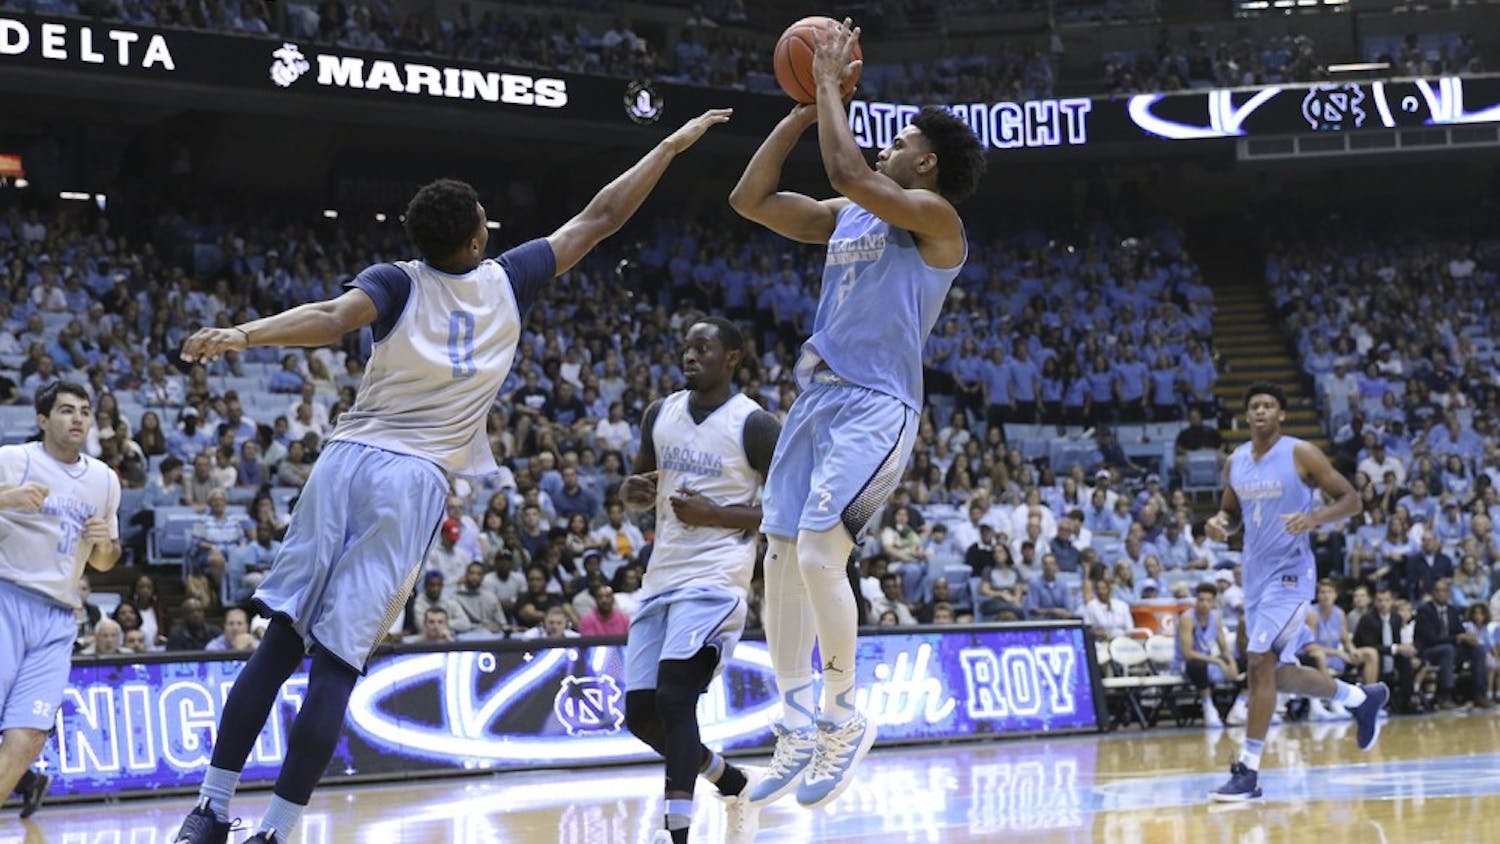 UNC guard Joel Berry (2) pulls up for a 3-point shot over guard Nate Britt (0) during the Late Night with Roy scrimmage.